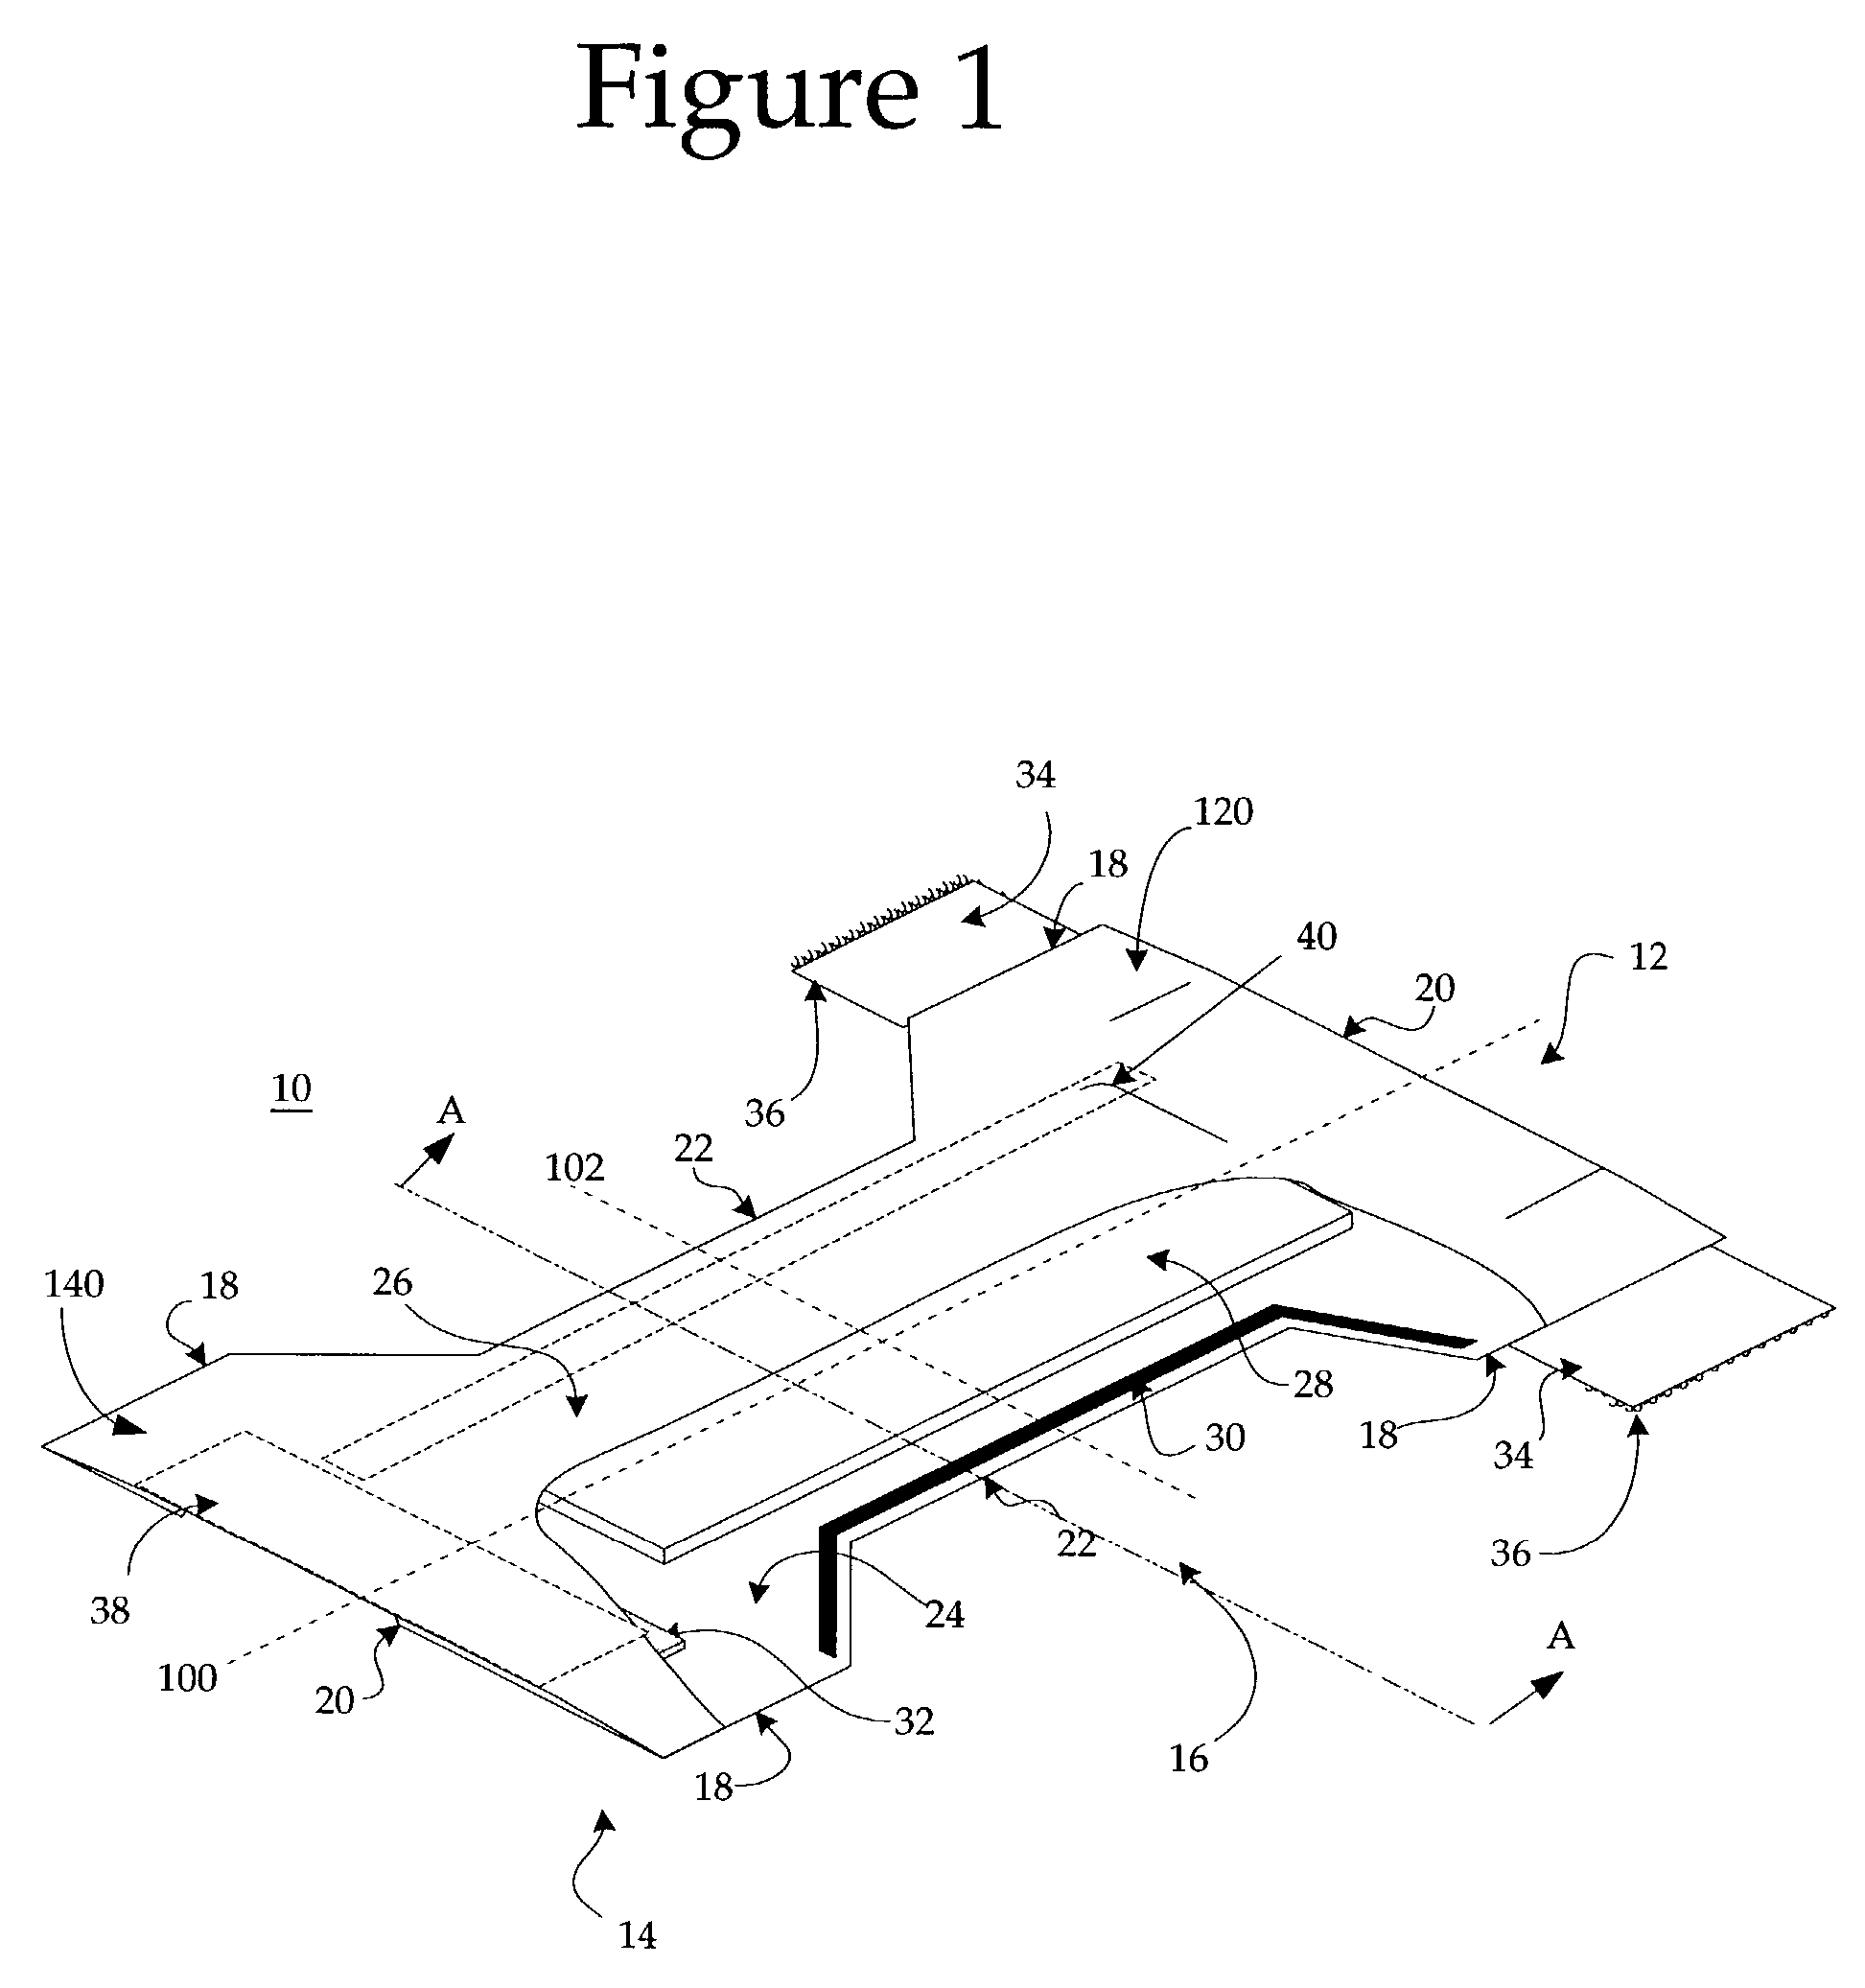 Absorbent articles containing absorbent cores having zoned absorbency and methods of making same